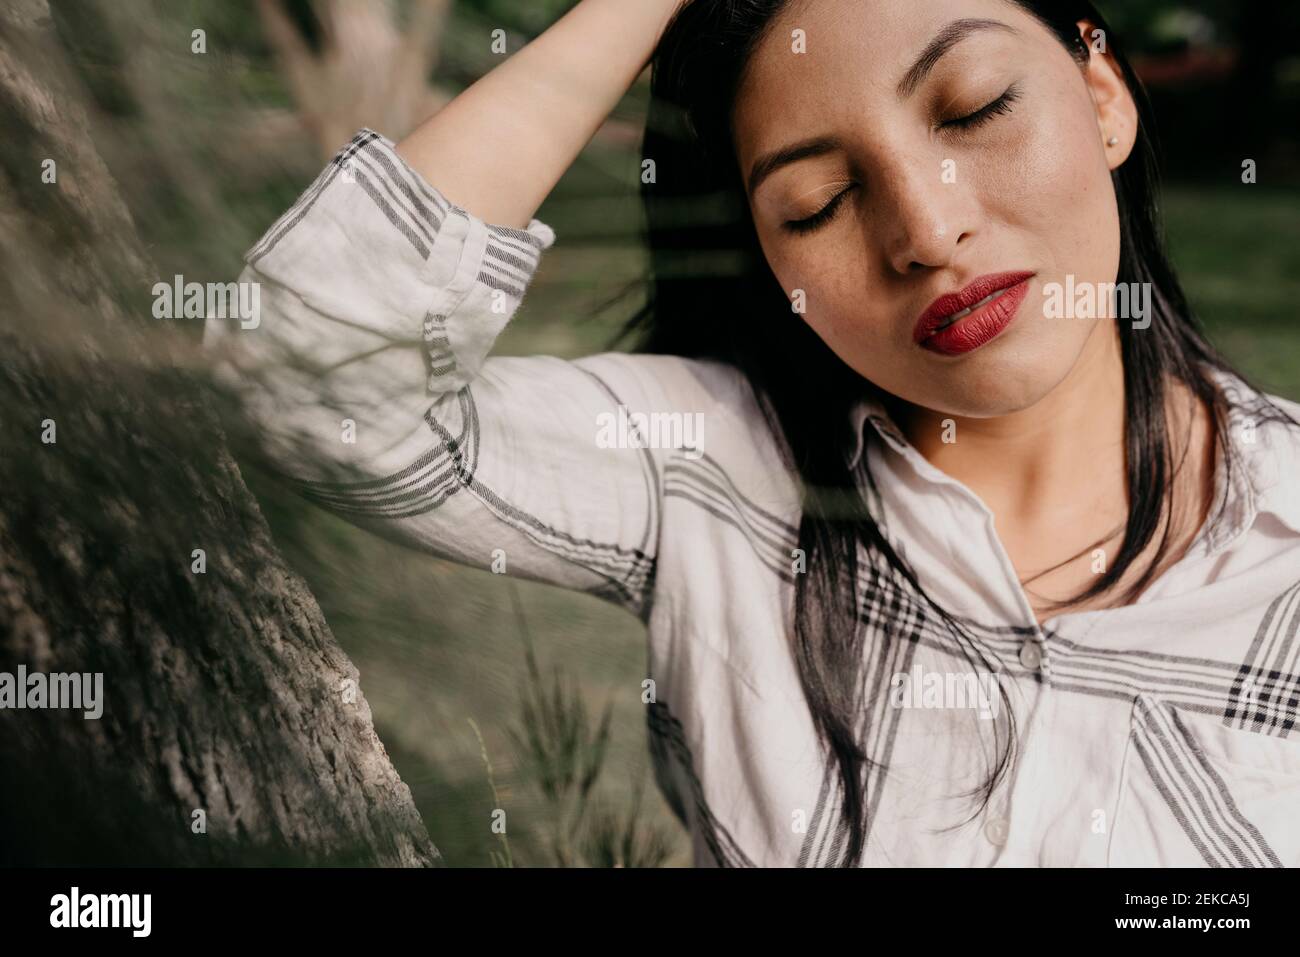 Beautiful woman with eyes closed at public park Stock Photo